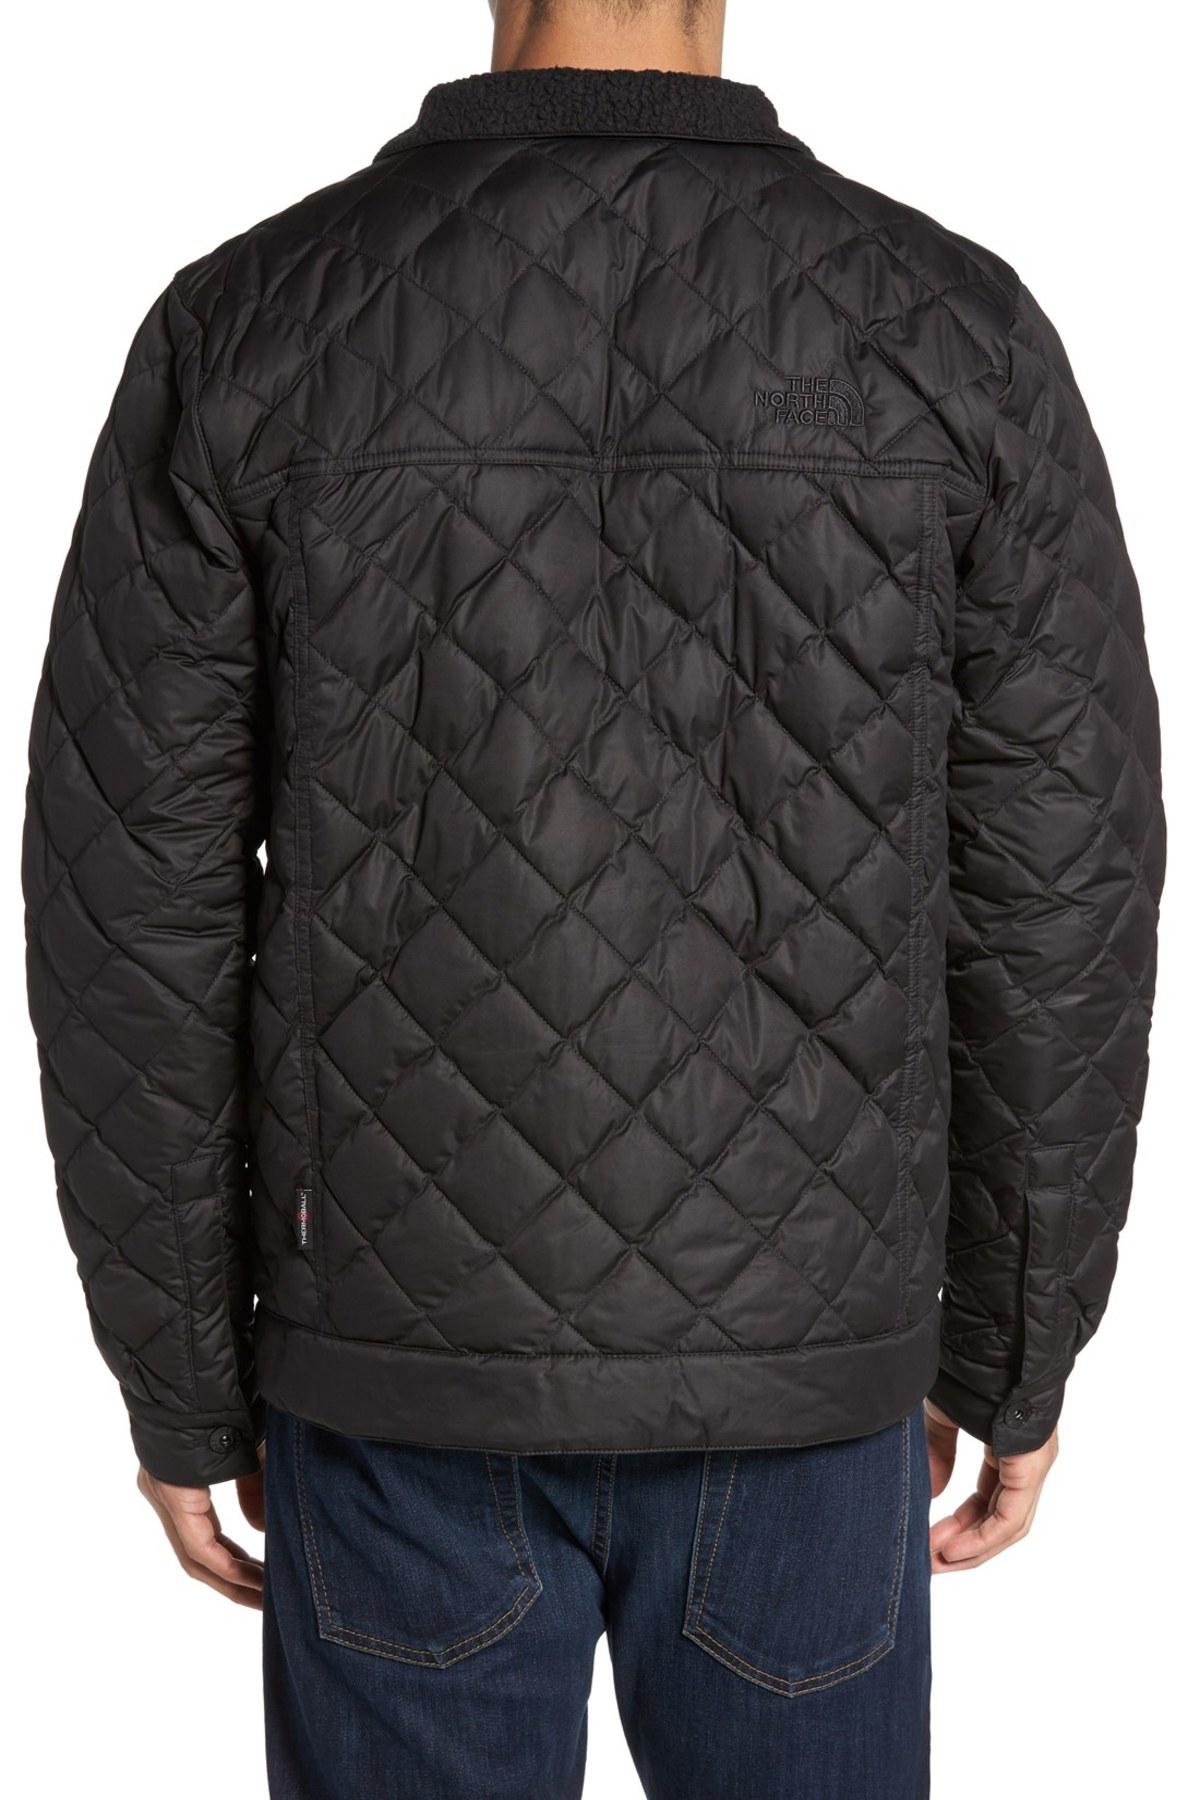 Lyst - The North Face Sherpa Fleece Lined Quilted Jacket in Black for Men